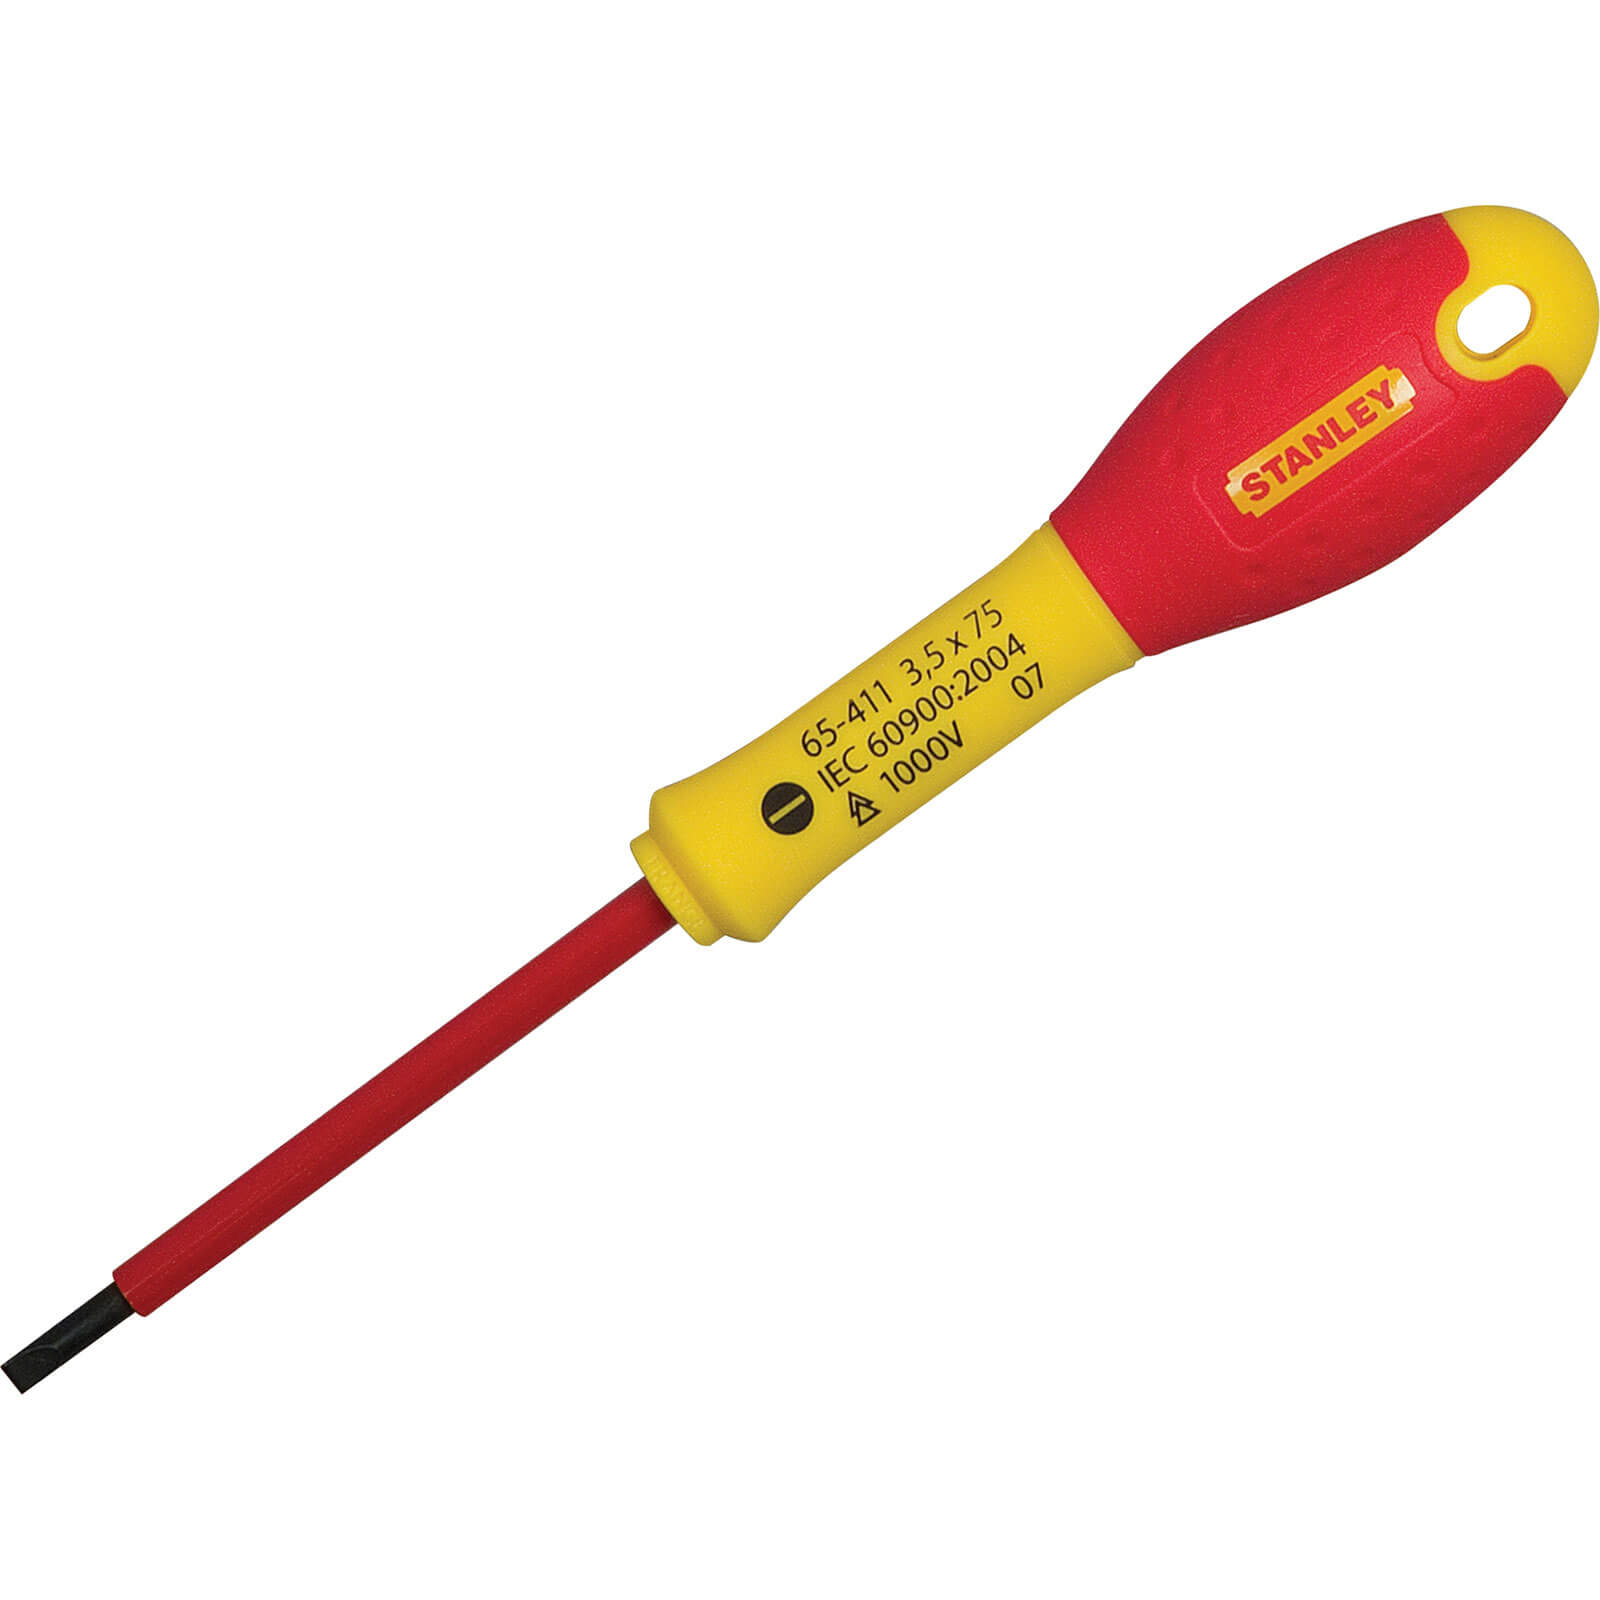 Image of Stanley FatMax Insulated Parallel Slotted Screwdriver 4mm 100mm